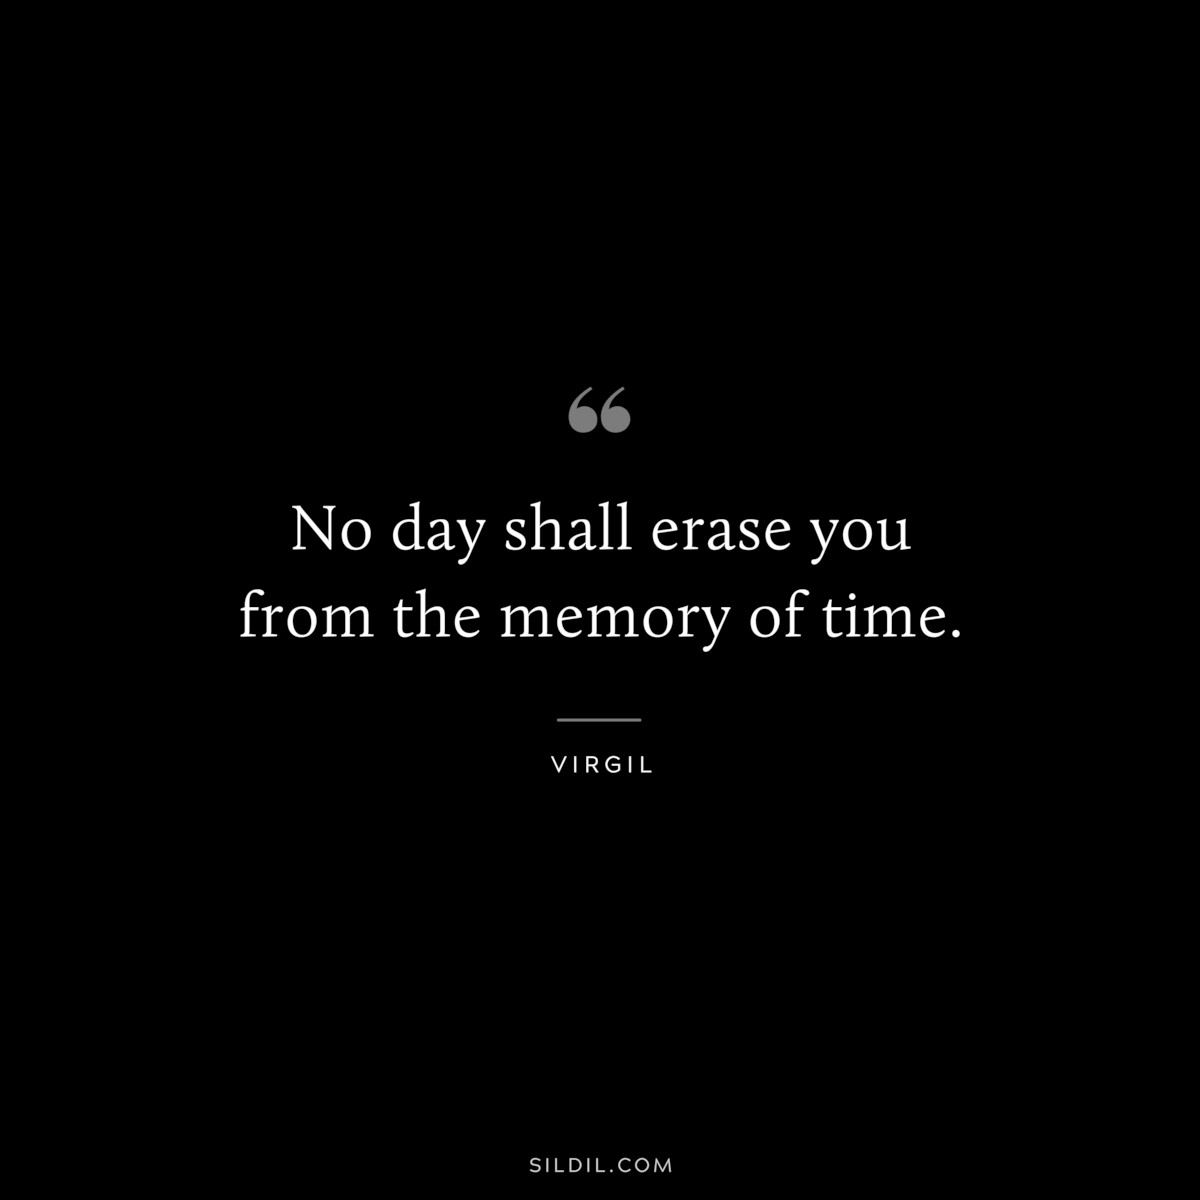 No day shall erase you from the memory of time. ― Virgil